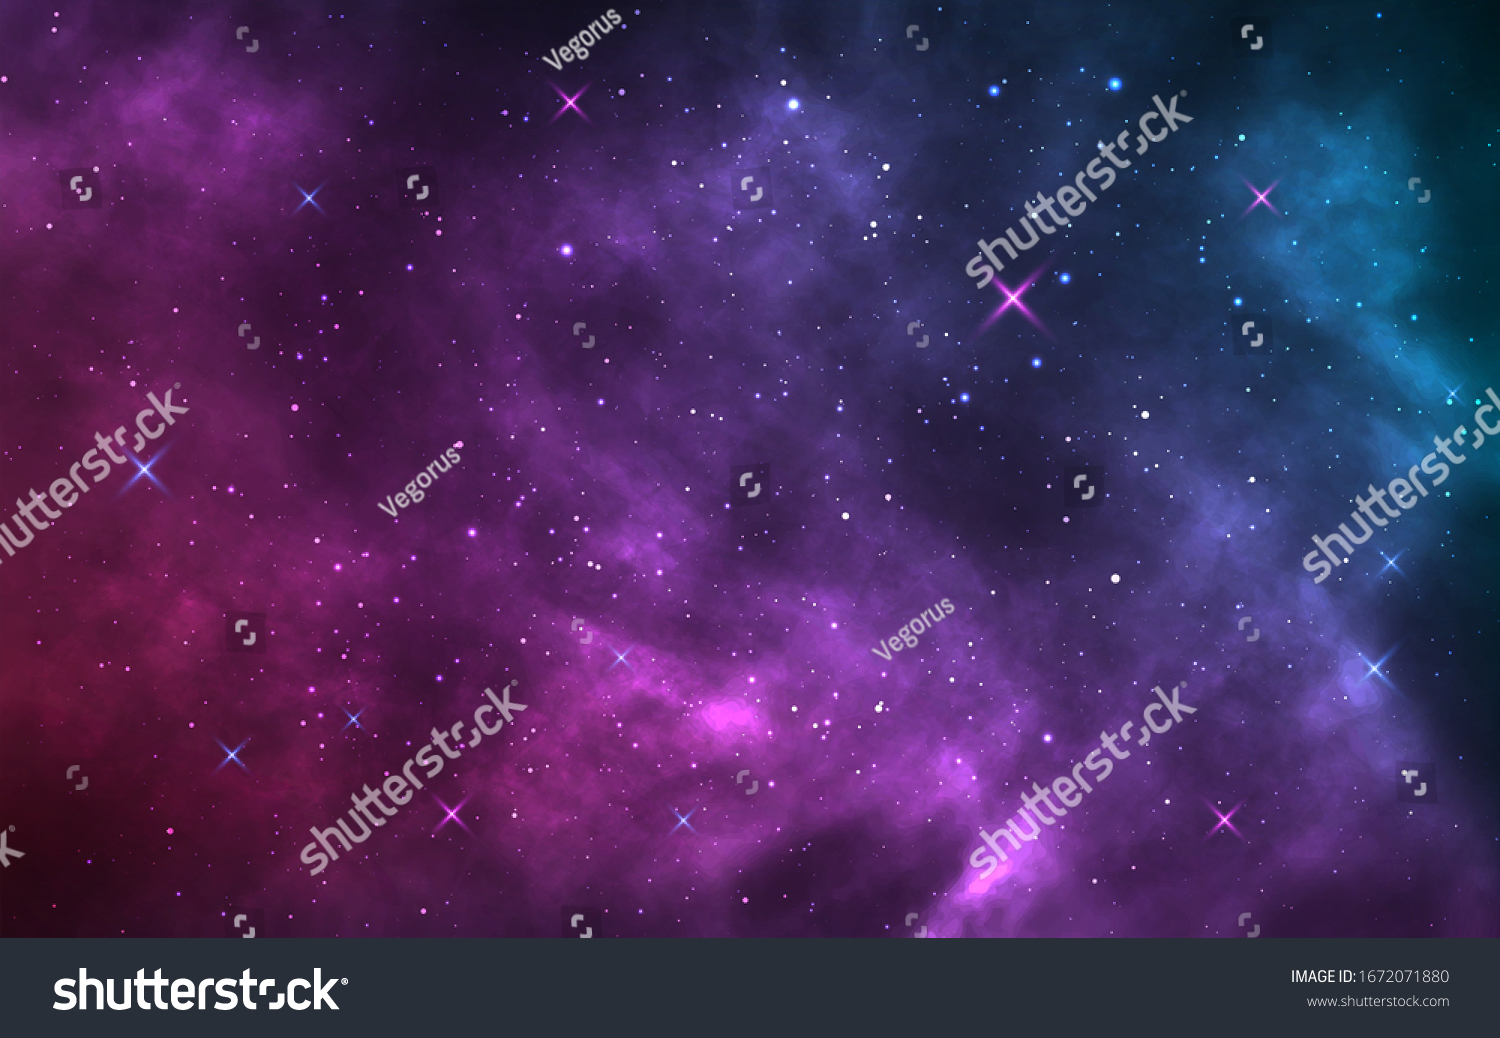 Stardust Stock Illustrations Images And Vectors Shutterstock 4796